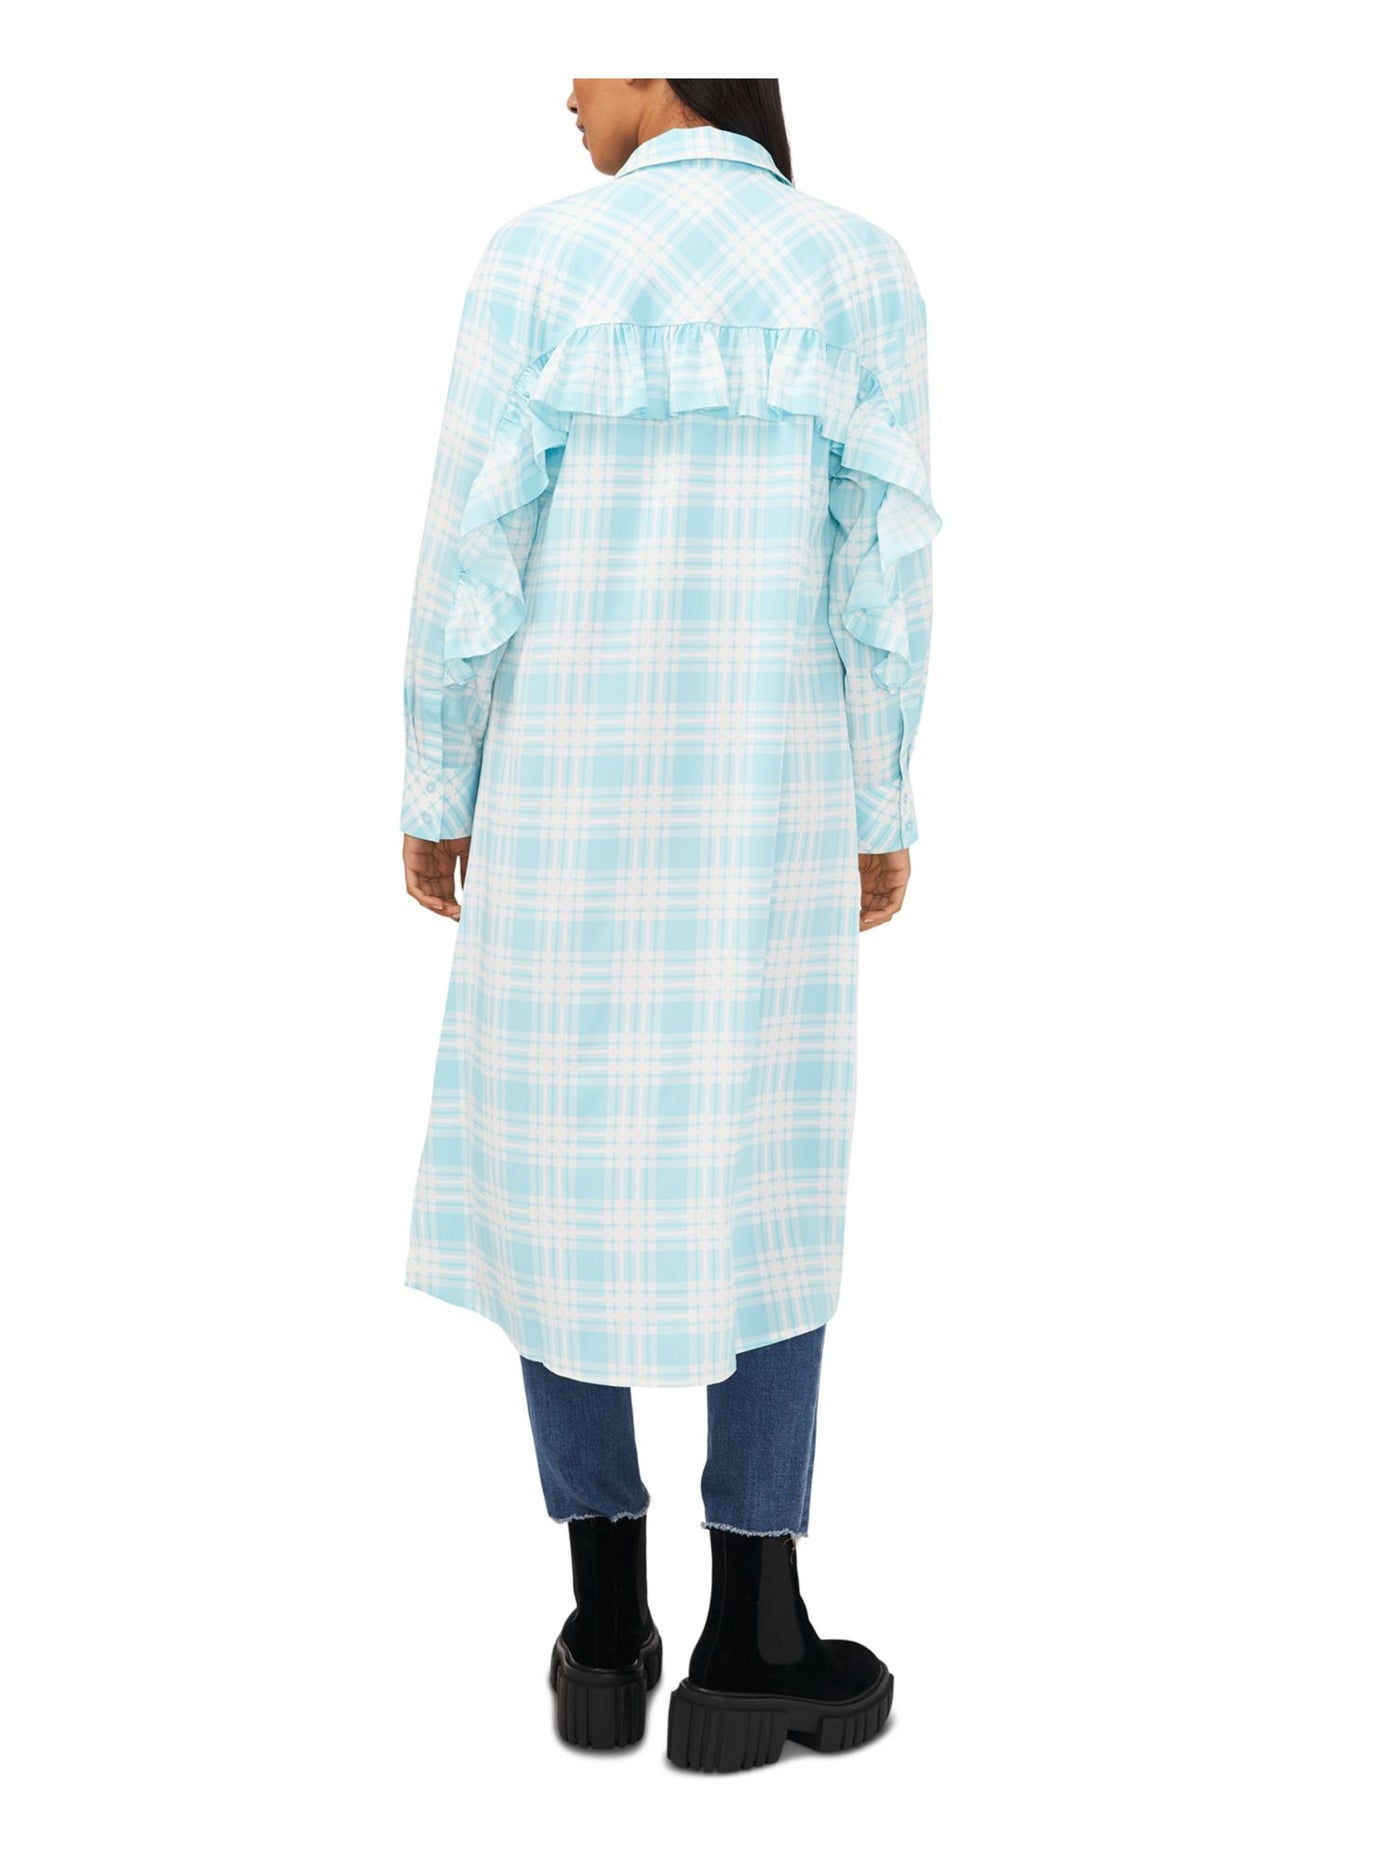 RILEY&RAE Womens Light Blue Ruffled Pocketed Slitted Button Down Plaid Cuffed Sleeve Point Collar Below The Knee Shirt Dress XS